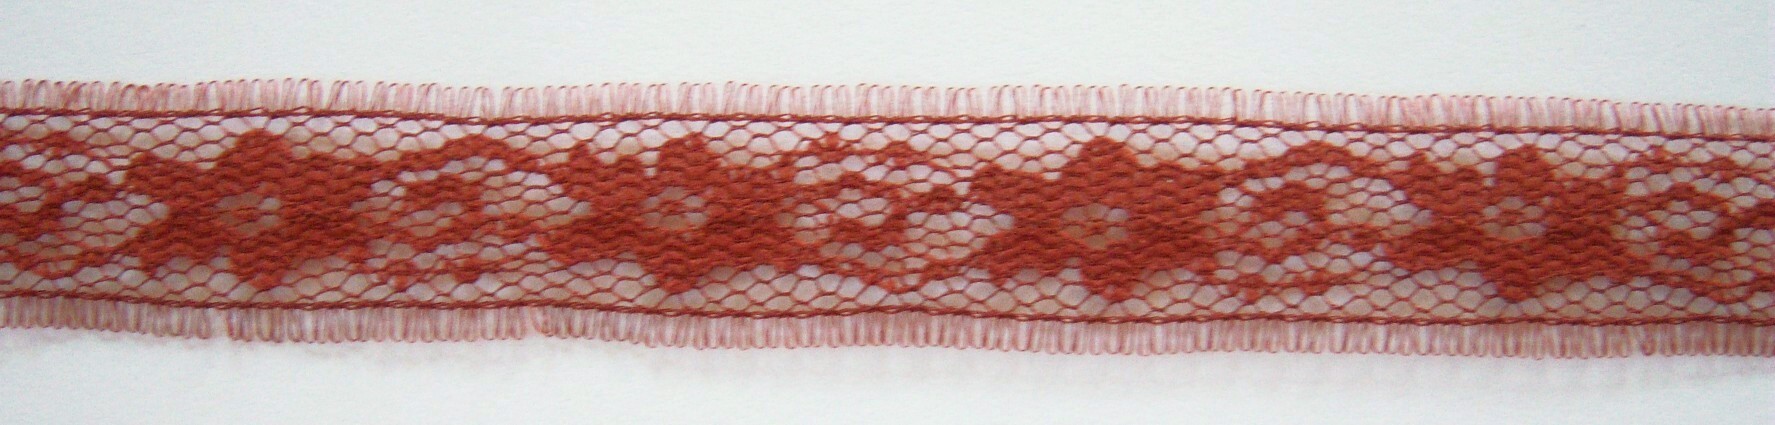 Sienna 3/4" Lace Seconds